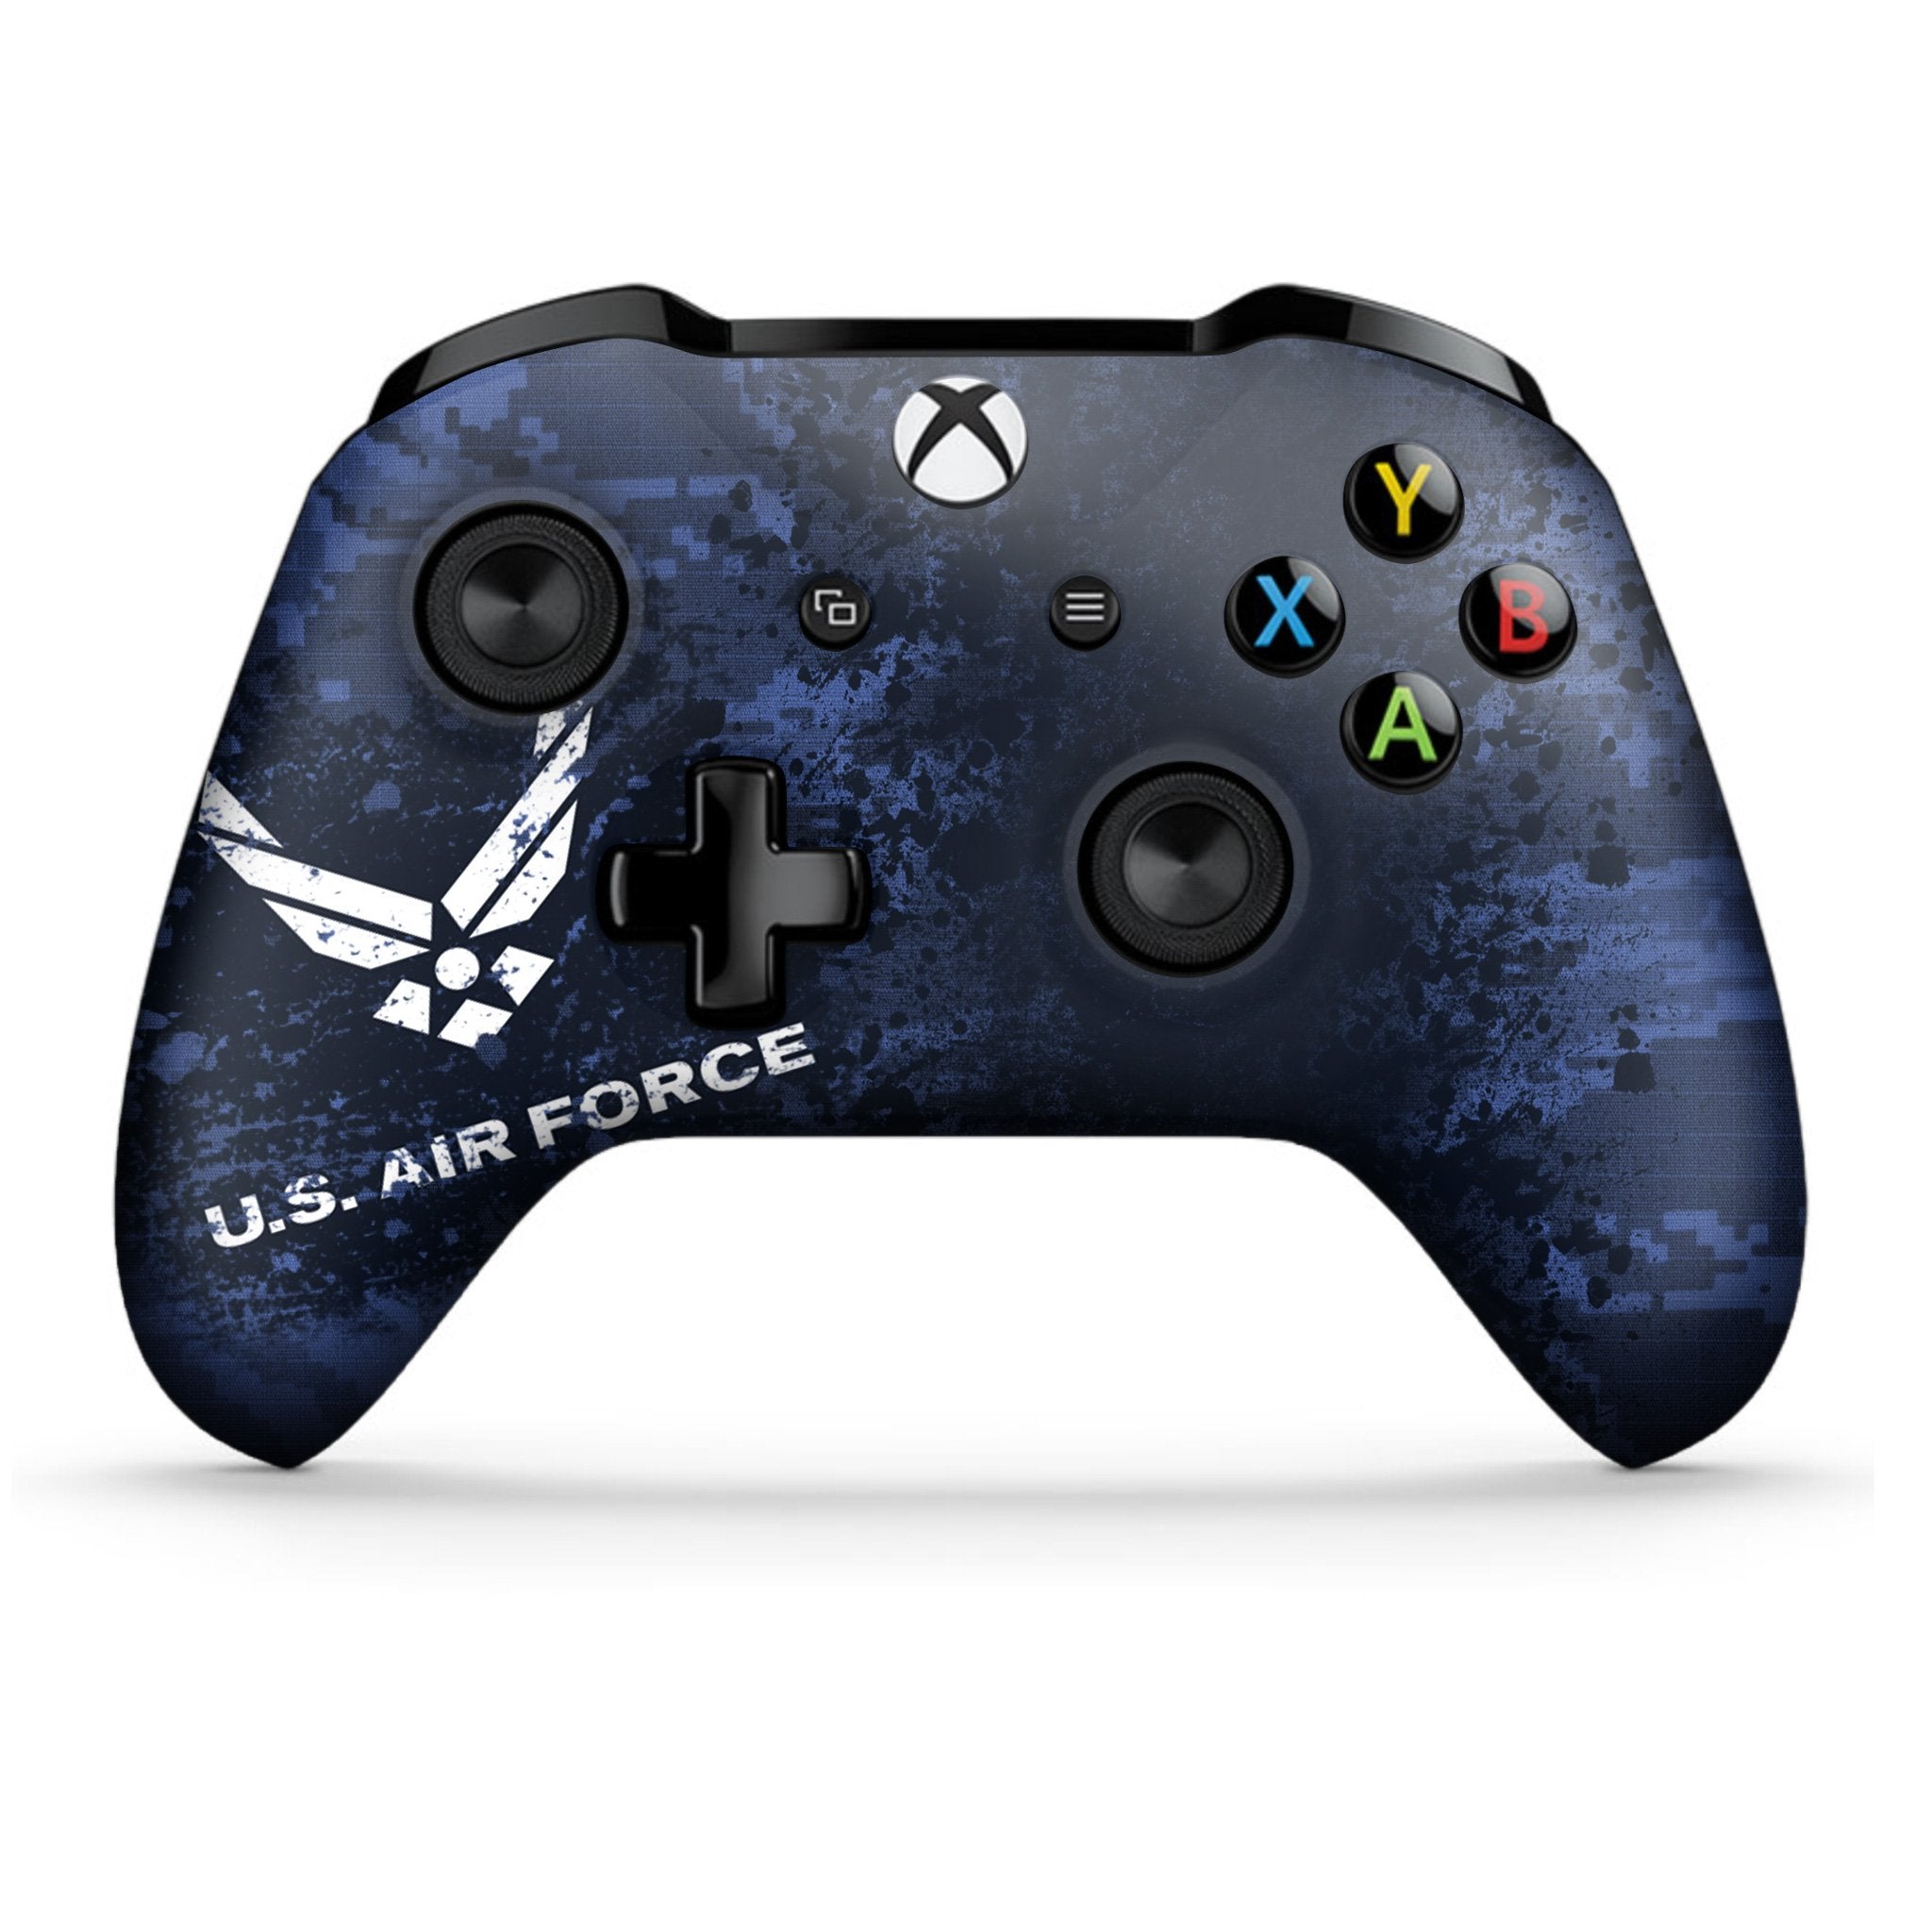 U.S Air Force Xbox One S Custom Controller (with 3.5 jack)